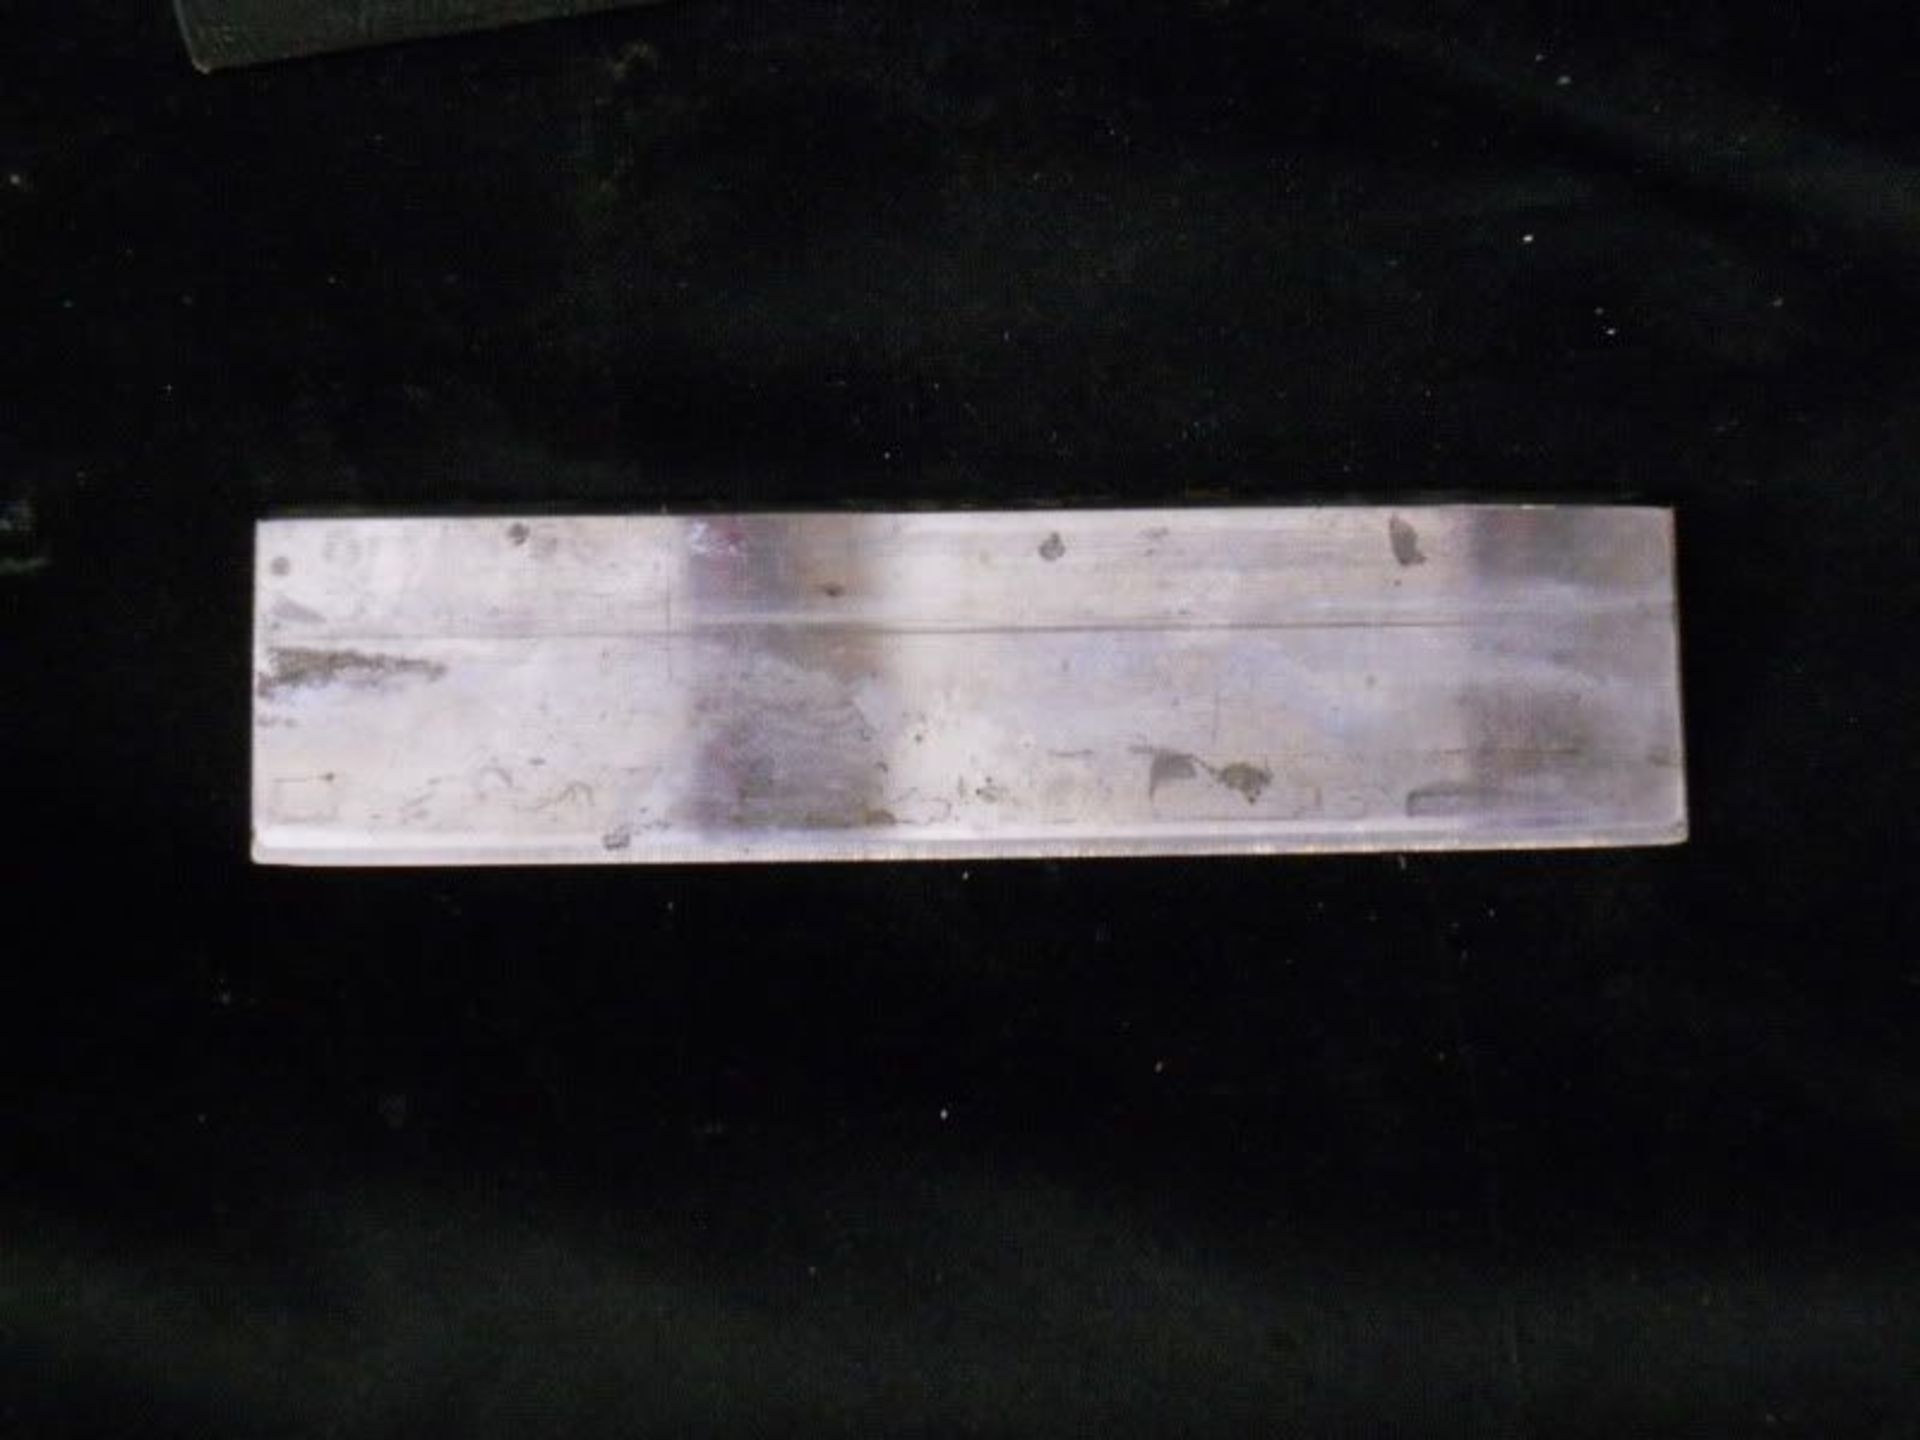 American Optical Company Microtome Knife Blade 120mm Model S3477, Qty 1, 320951625924 - Image 3 of 4